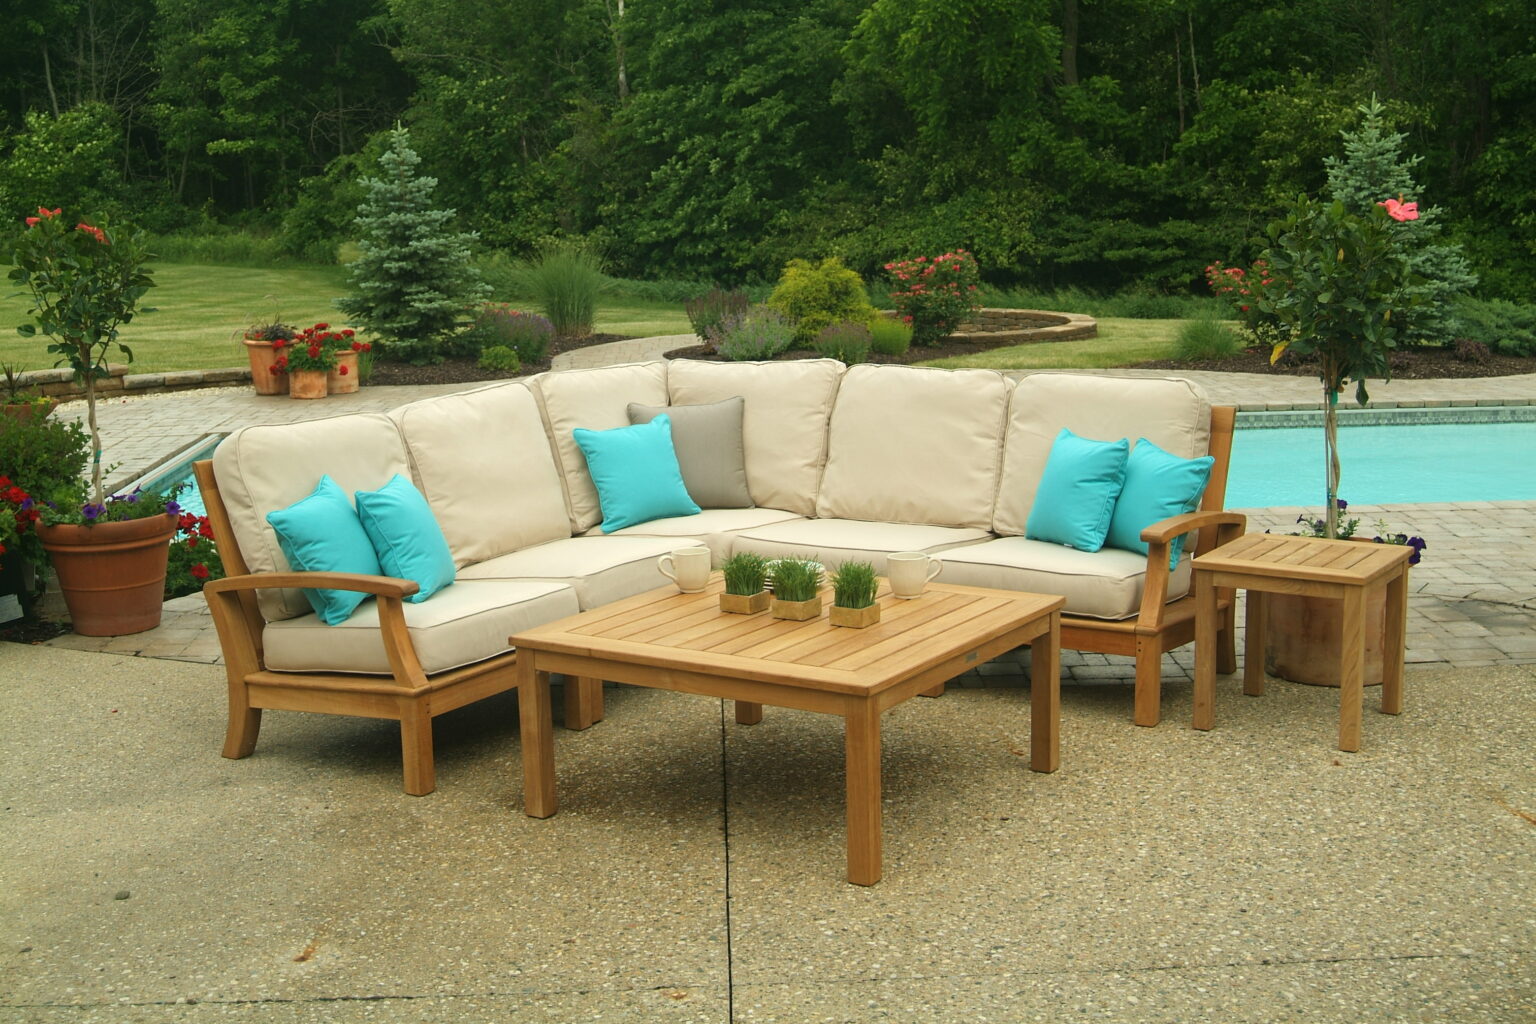 A TB Monterey outdoor sectional positioned by a pool with aqua blue coloured pillows